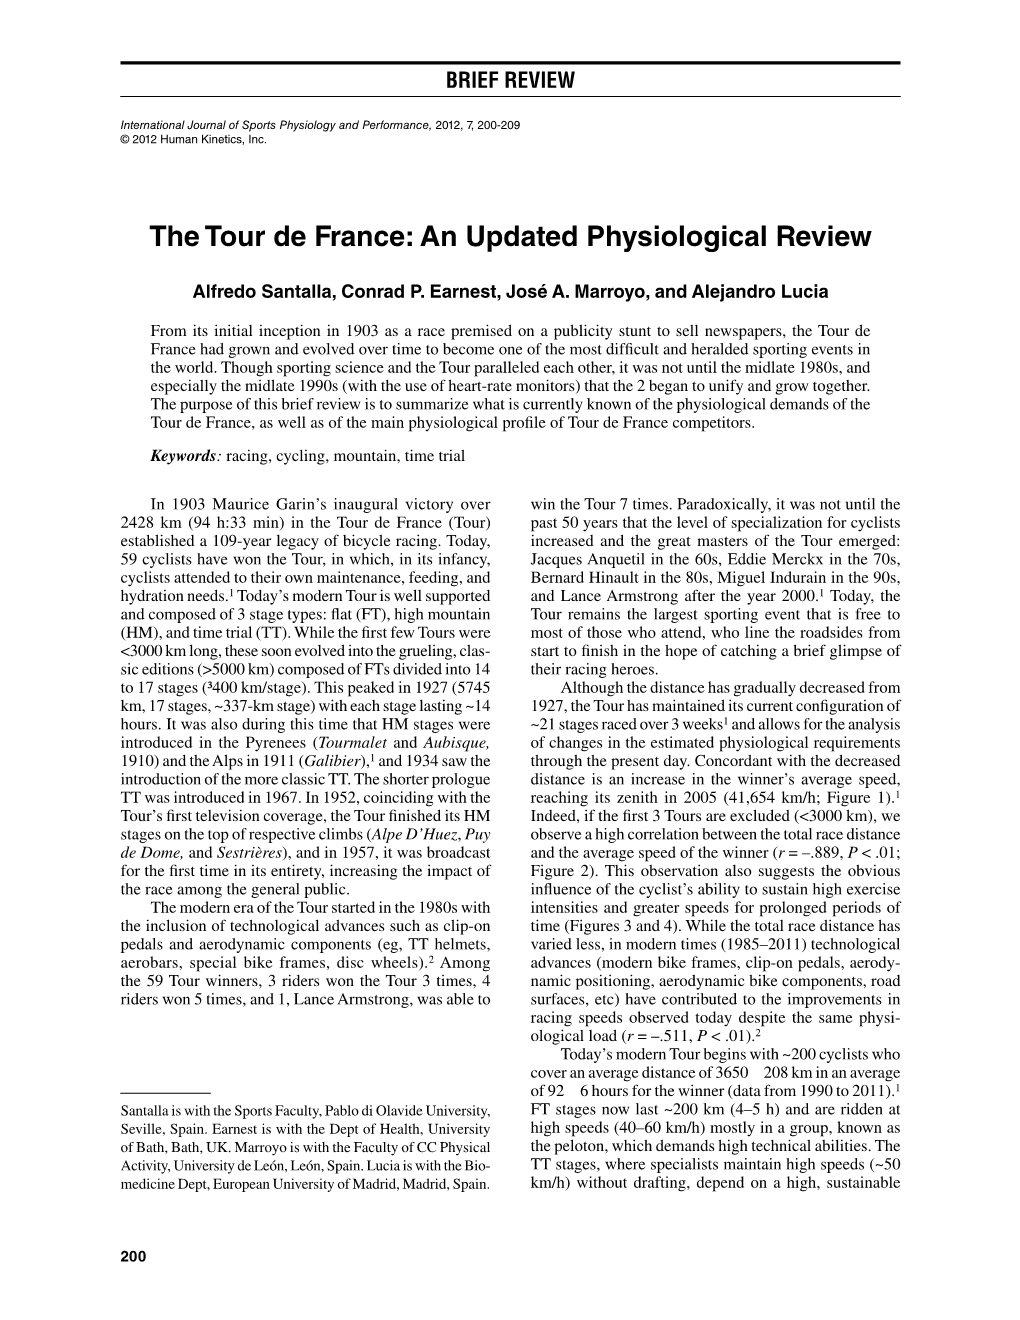 The Tour De France: an Updated Physiological Review